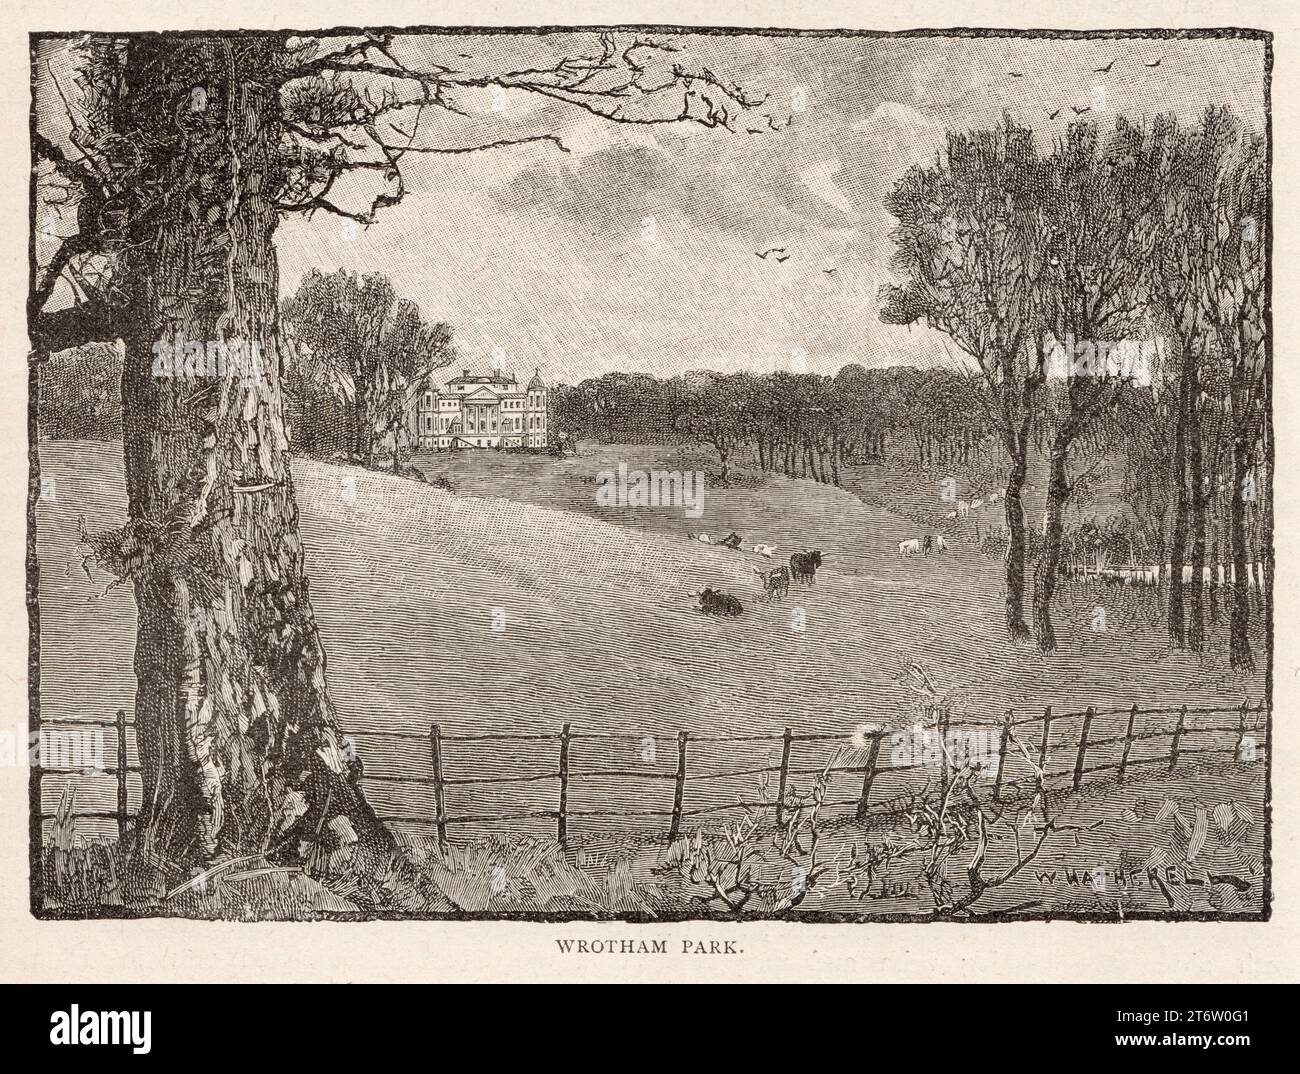 Engraving of Wrotham Park from the book: “Greater London, volume 1” by Cassel and Company, London 1898. Wrotham Park is a neo-Palladian English country house in the parish of South Mimms, Hertfordshire Stock Photo